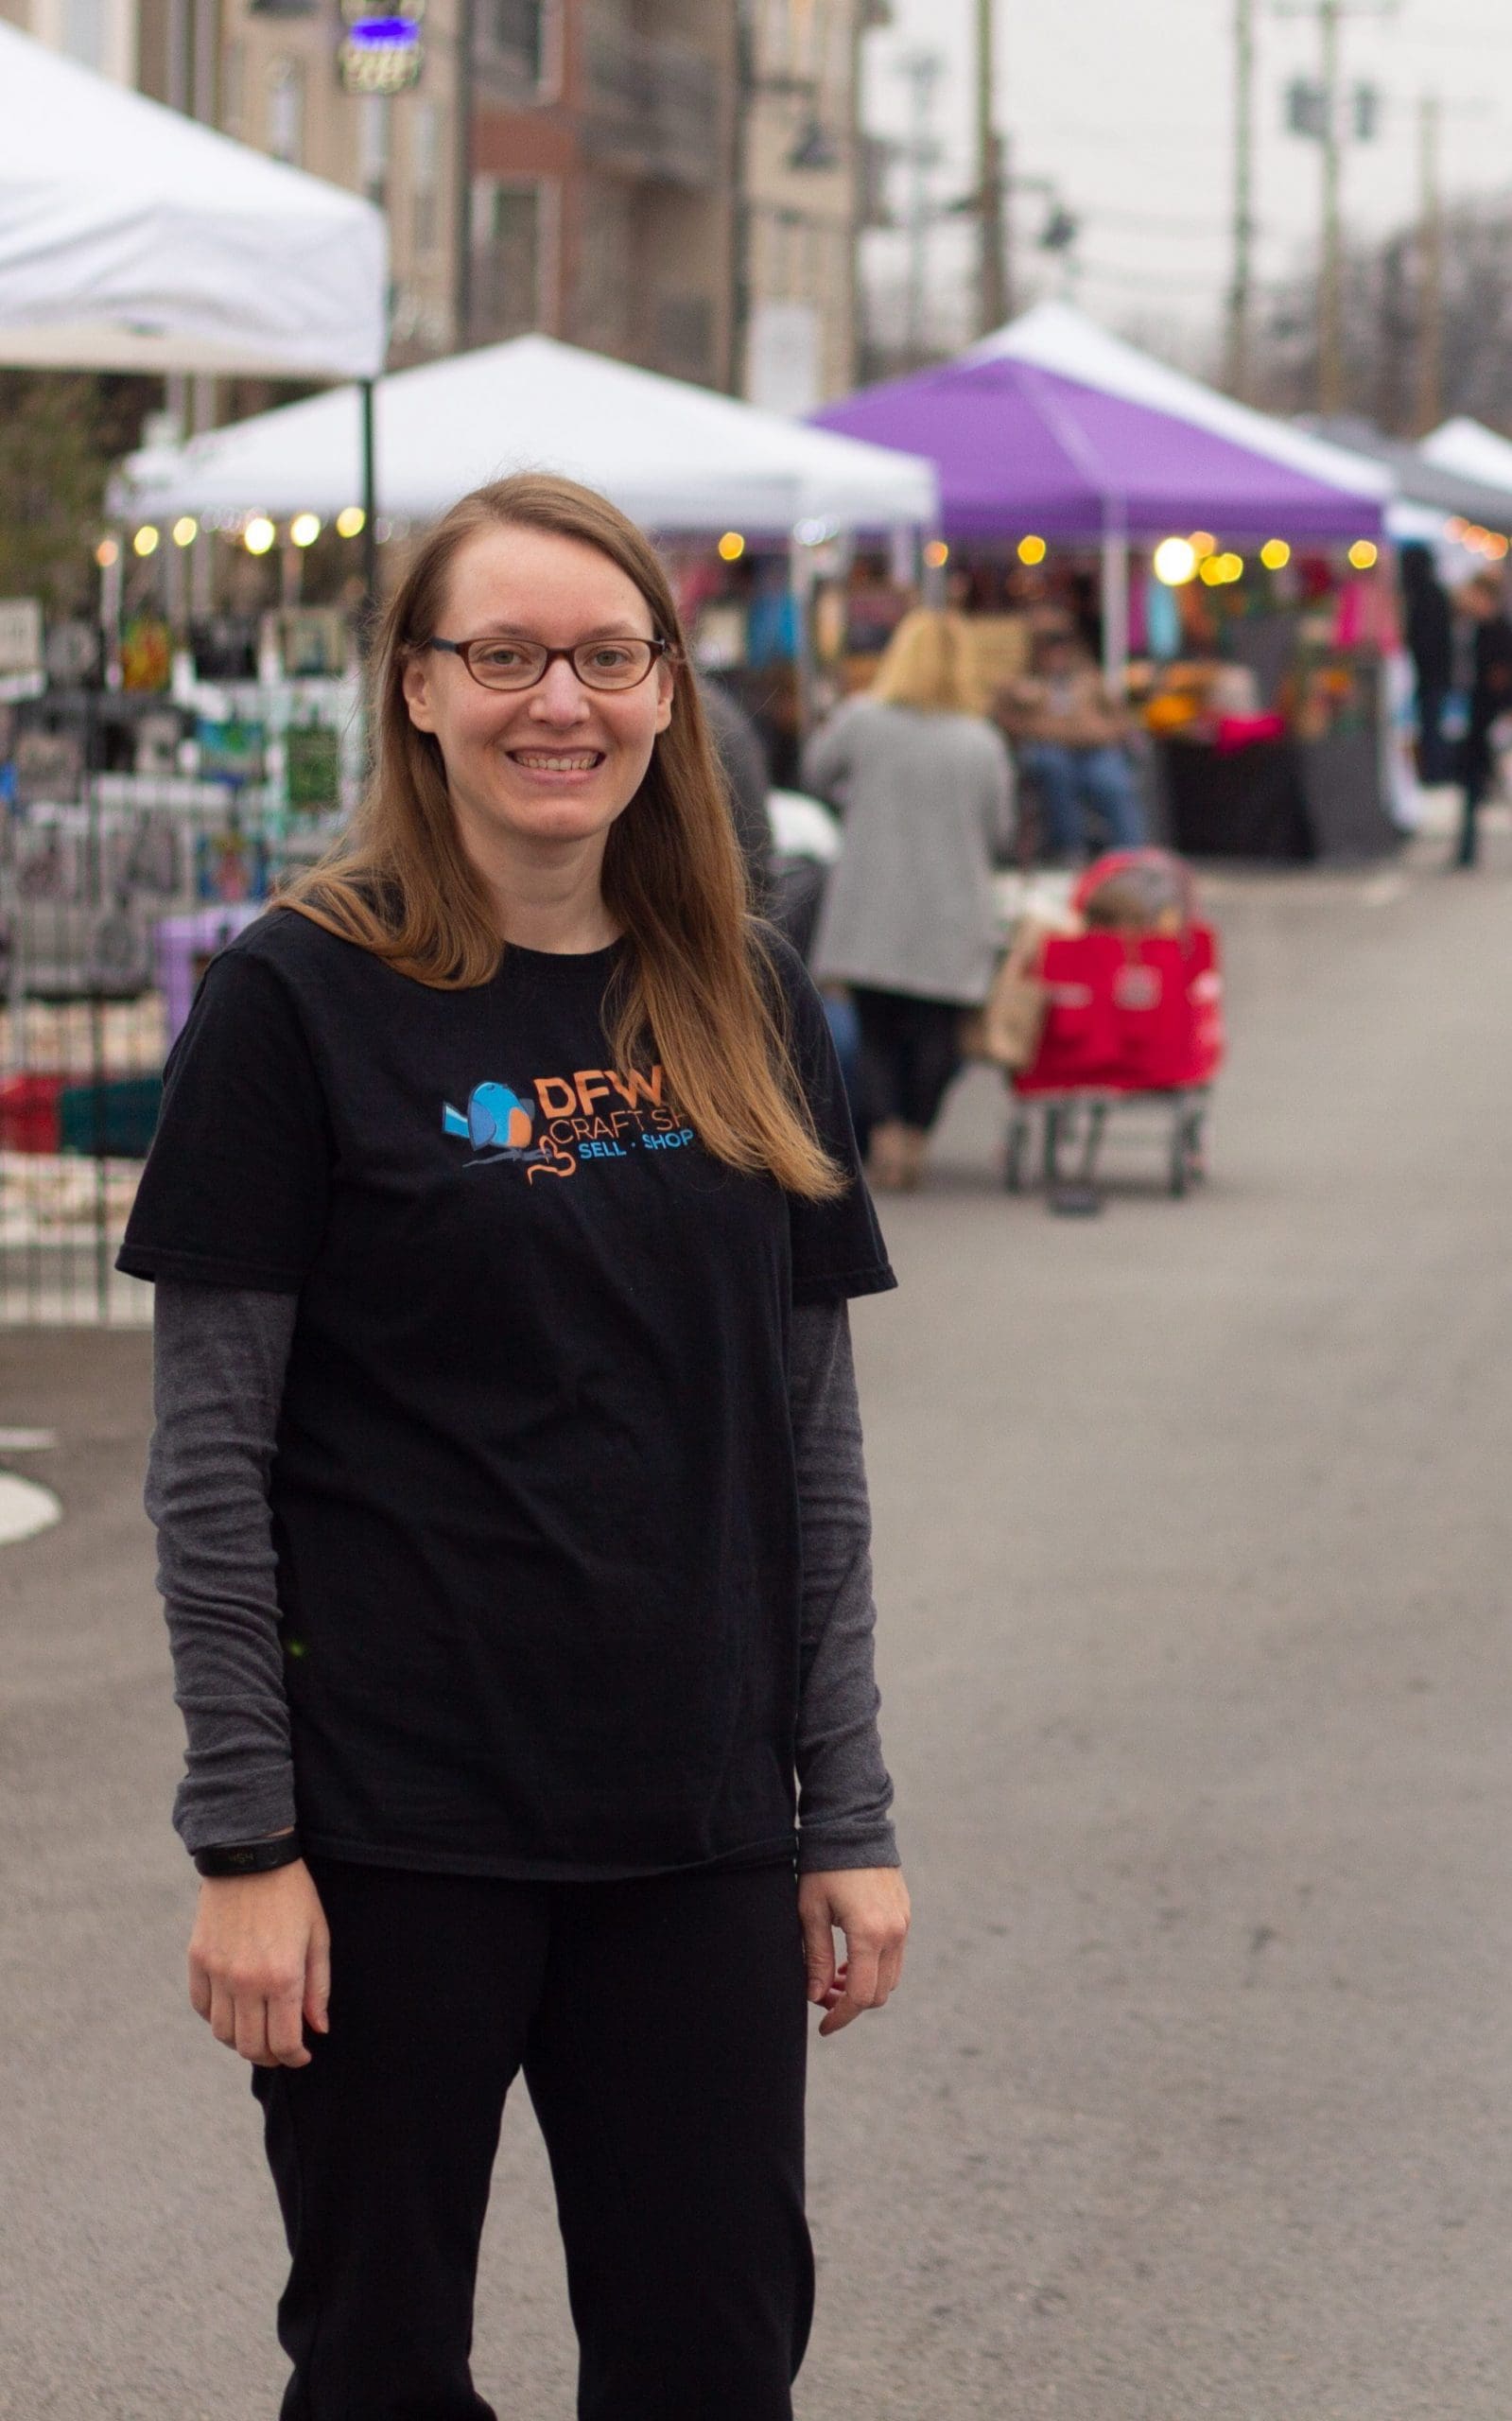 Tania of DFW Craft Shows stands at a street craft fair in Fort Worth Texas. She is wearing a DFWCS shirt and there are colorful canopies behind her.